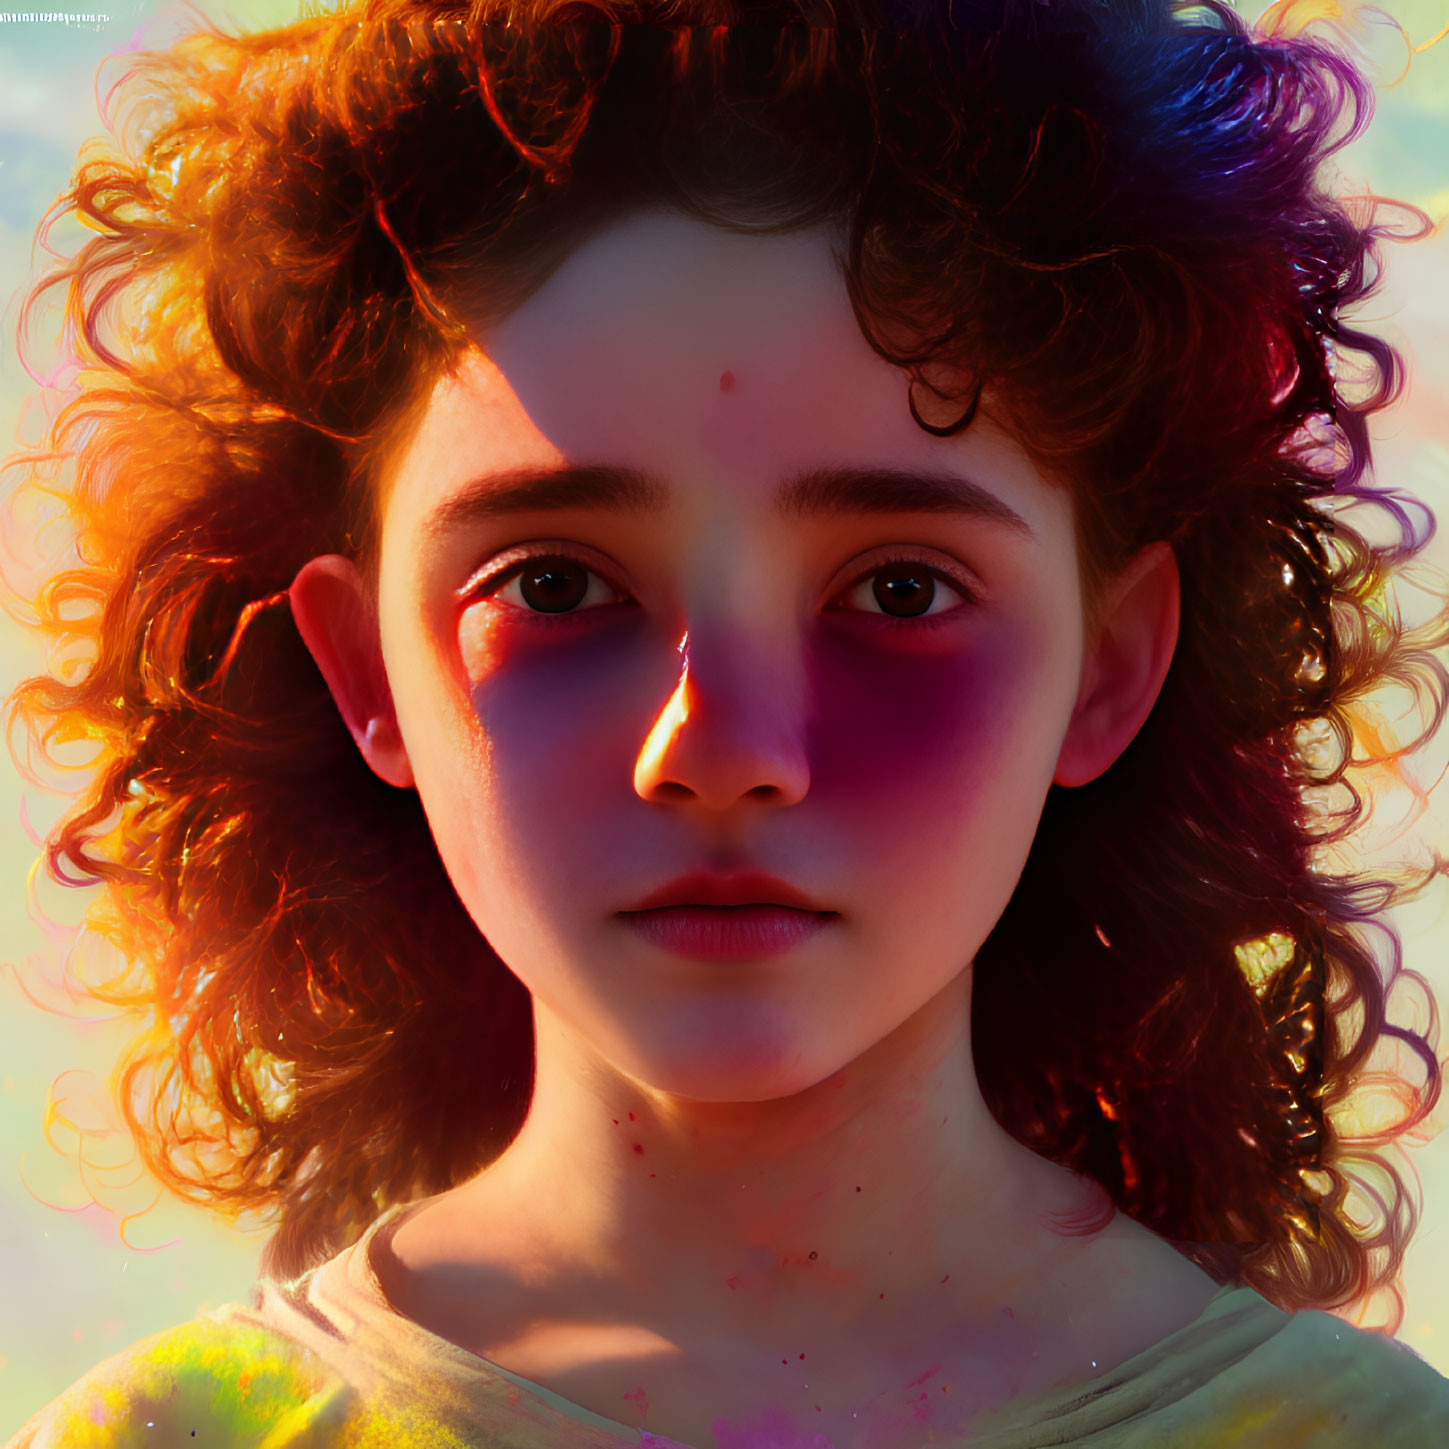 Young individual with curly hair and striking eyes under warm light